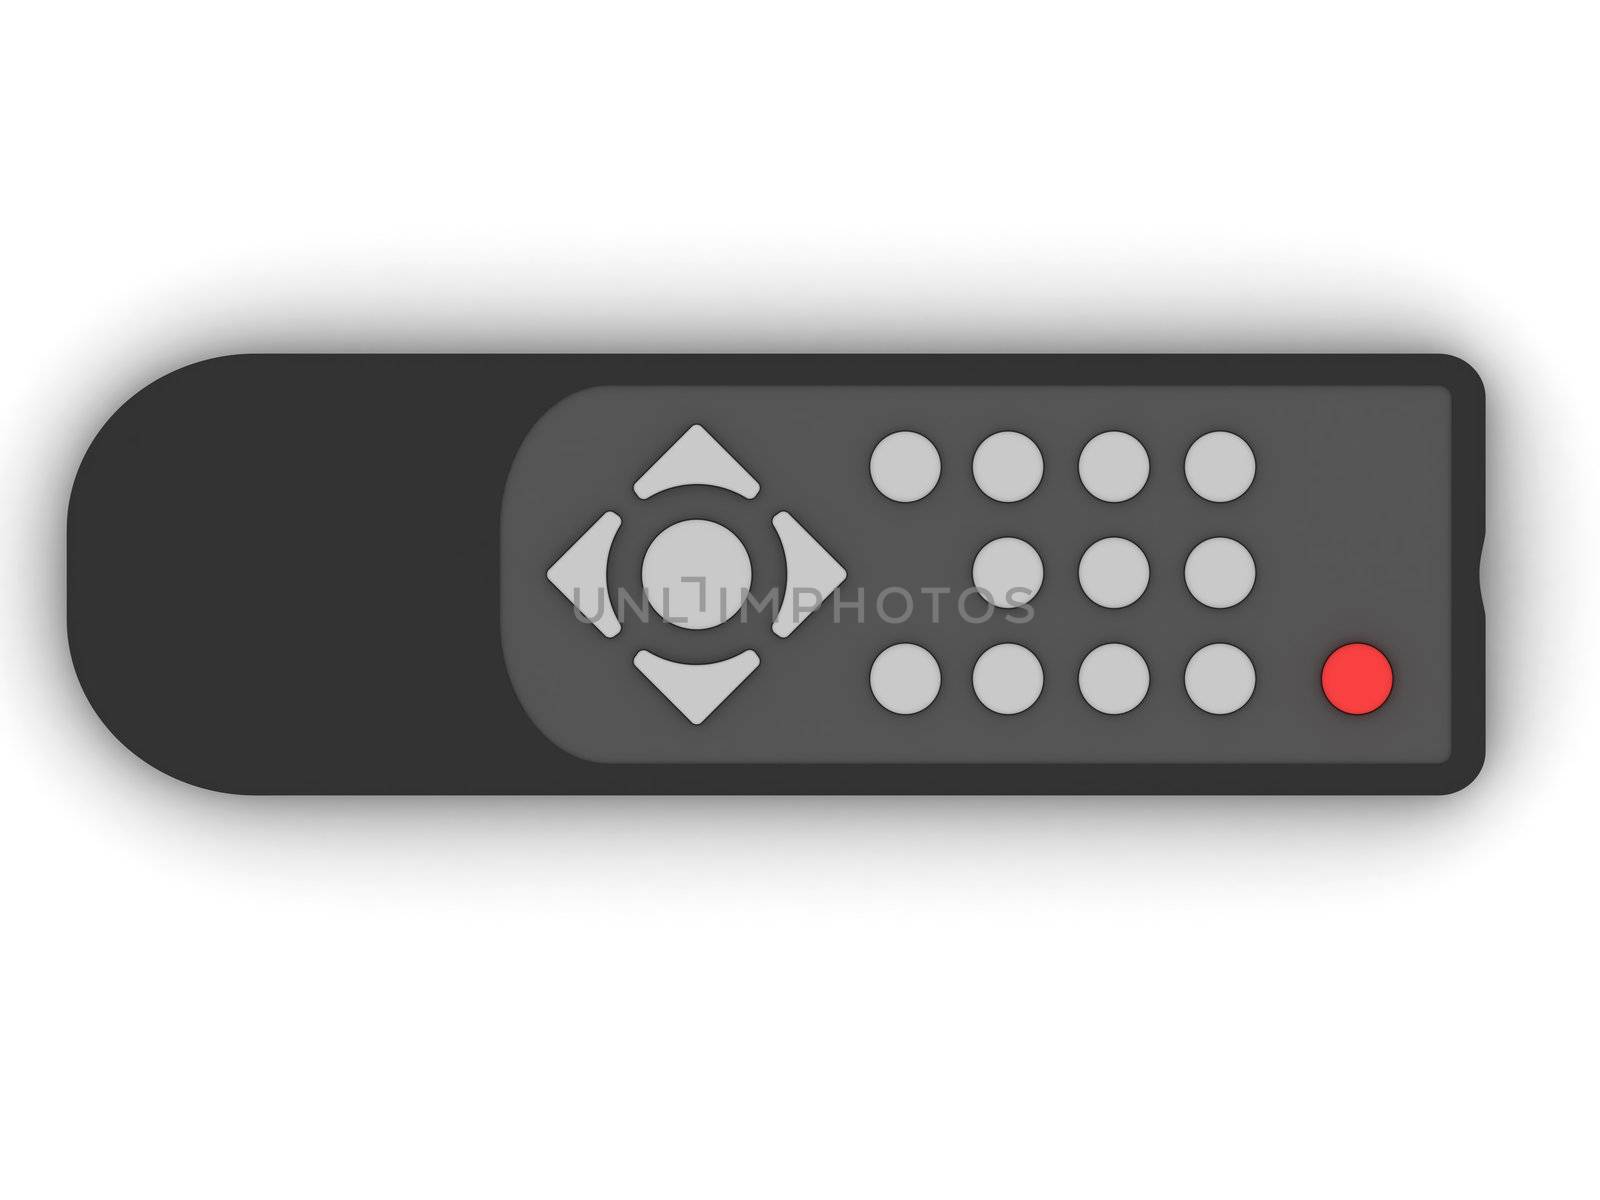 Universal remote control on white background. High resolution 3D image rendered with soft shadows.